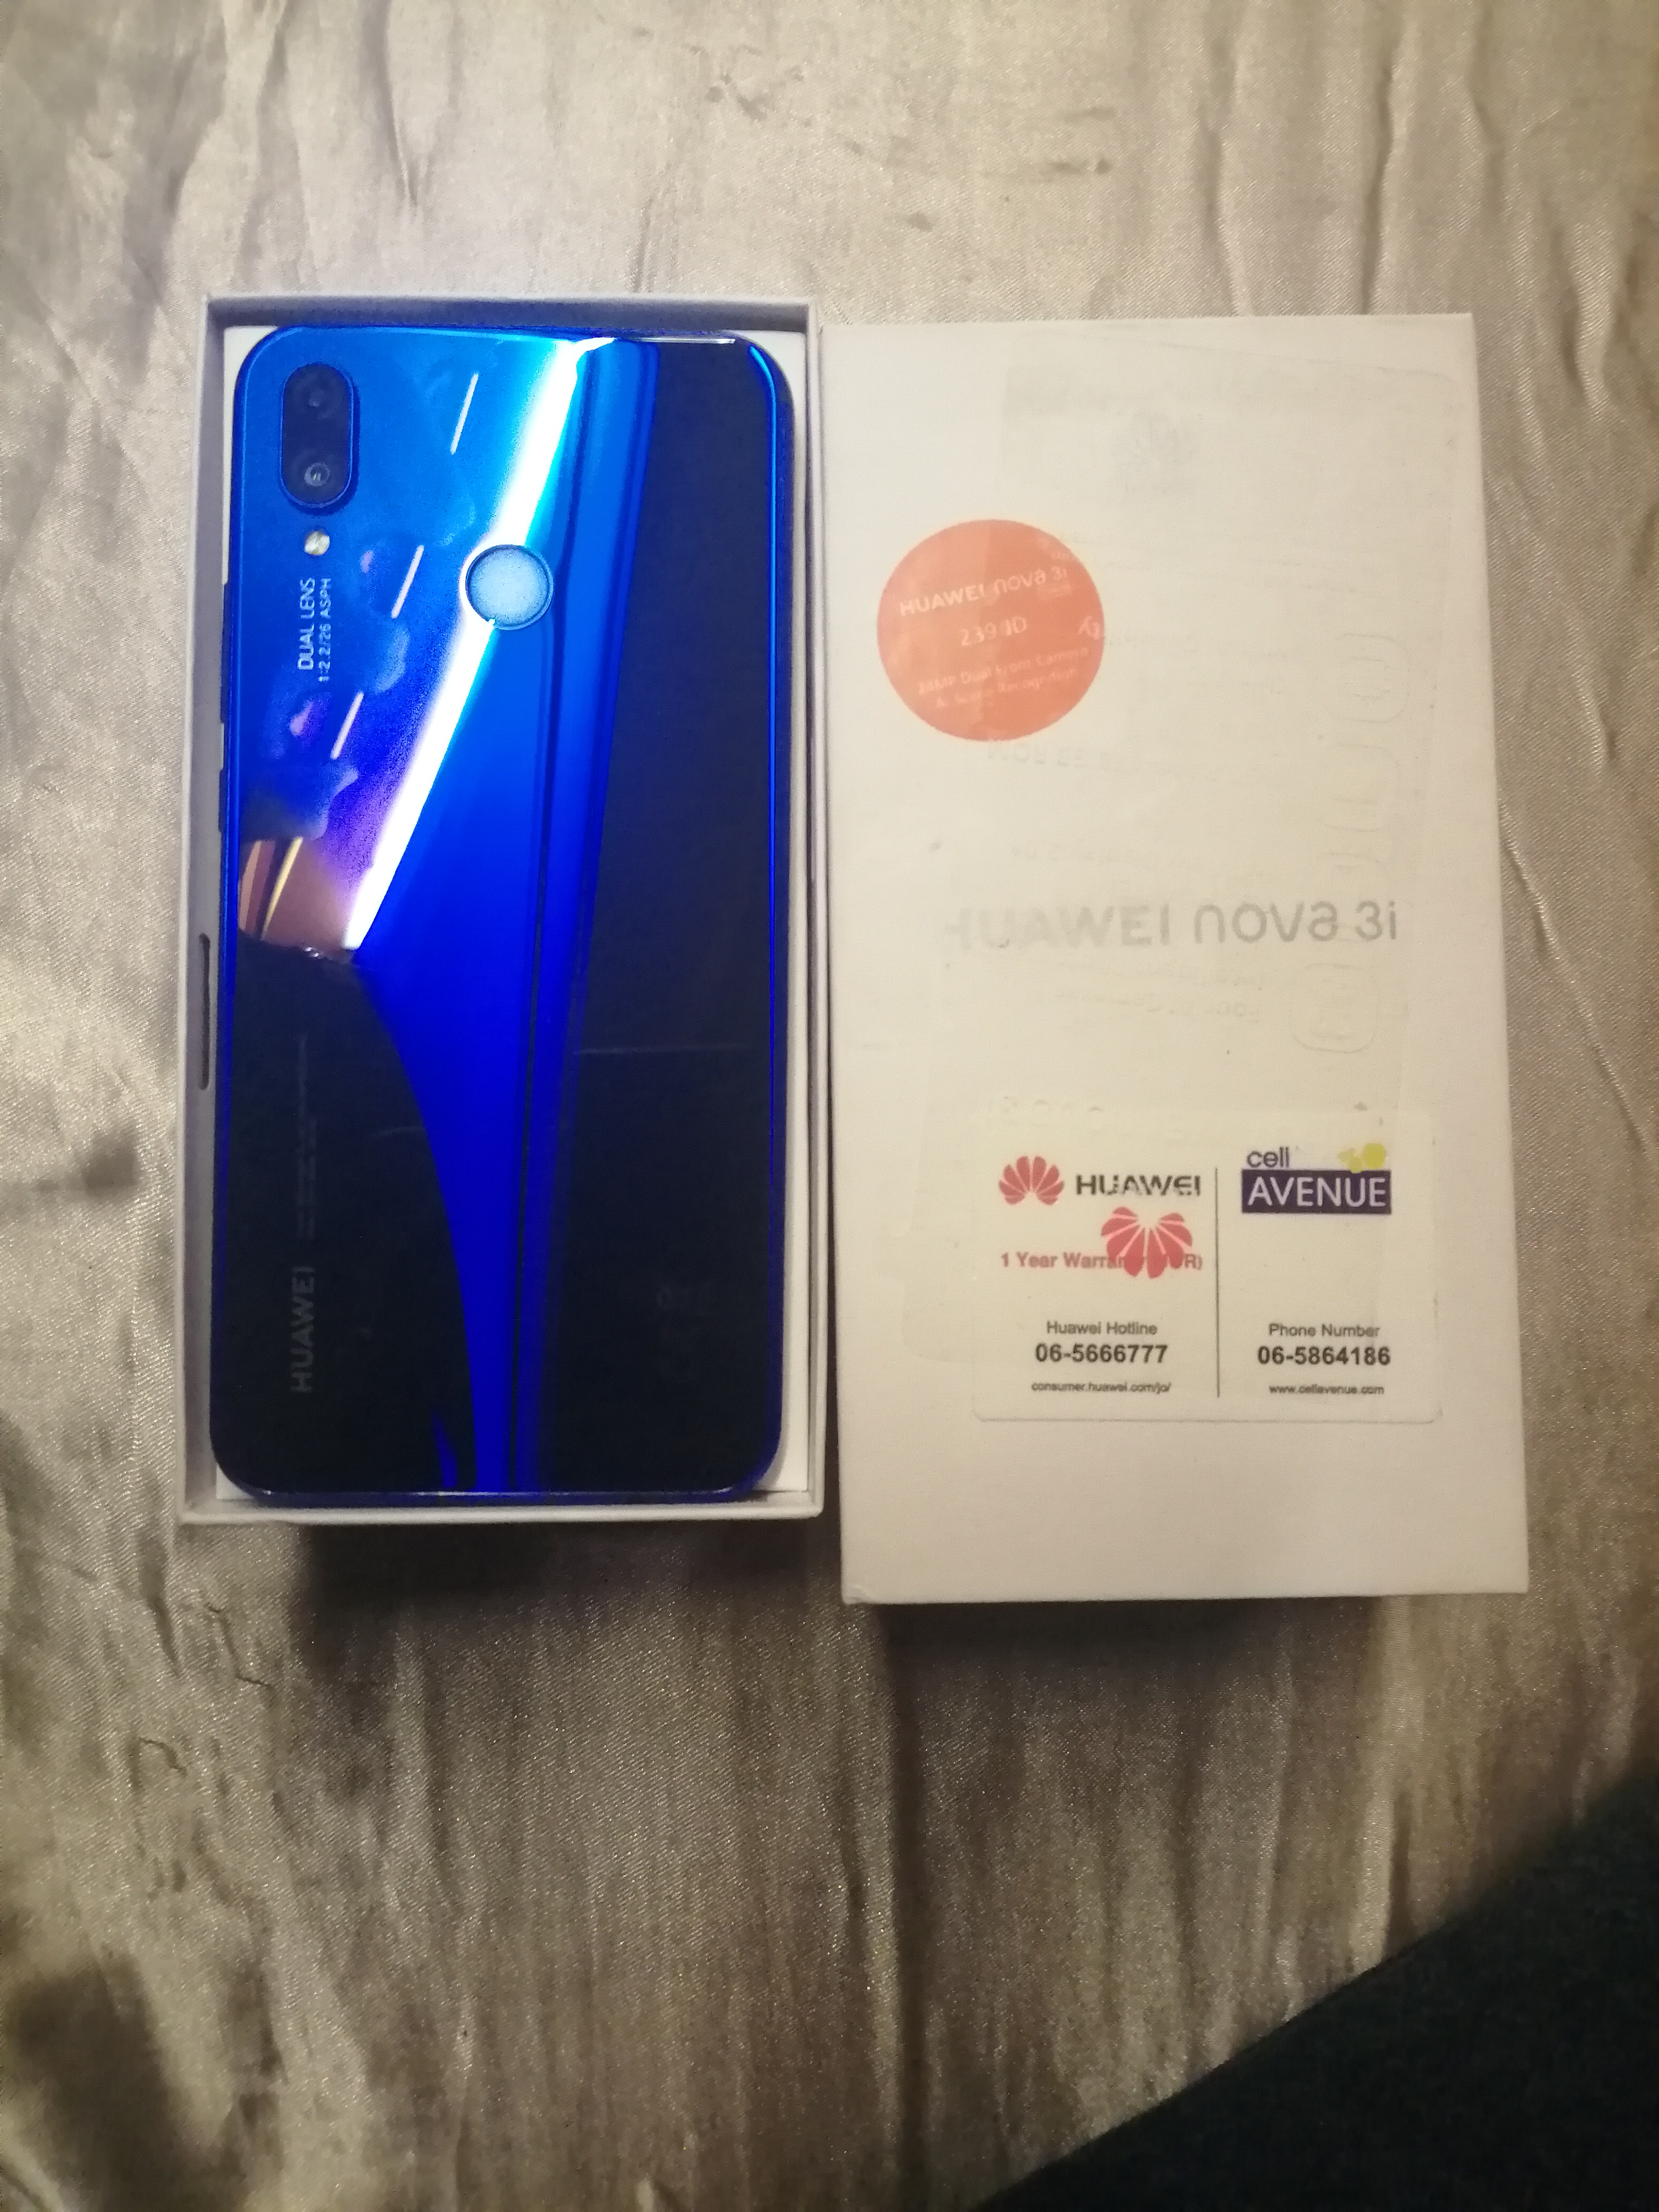 Assalaamu Alaikkum Brother,Sister All products are brand new, unlocked sealed in box comes with 1 year international warranty and also 6 months return policy - -  هواوي 3i كامل اغراضو...